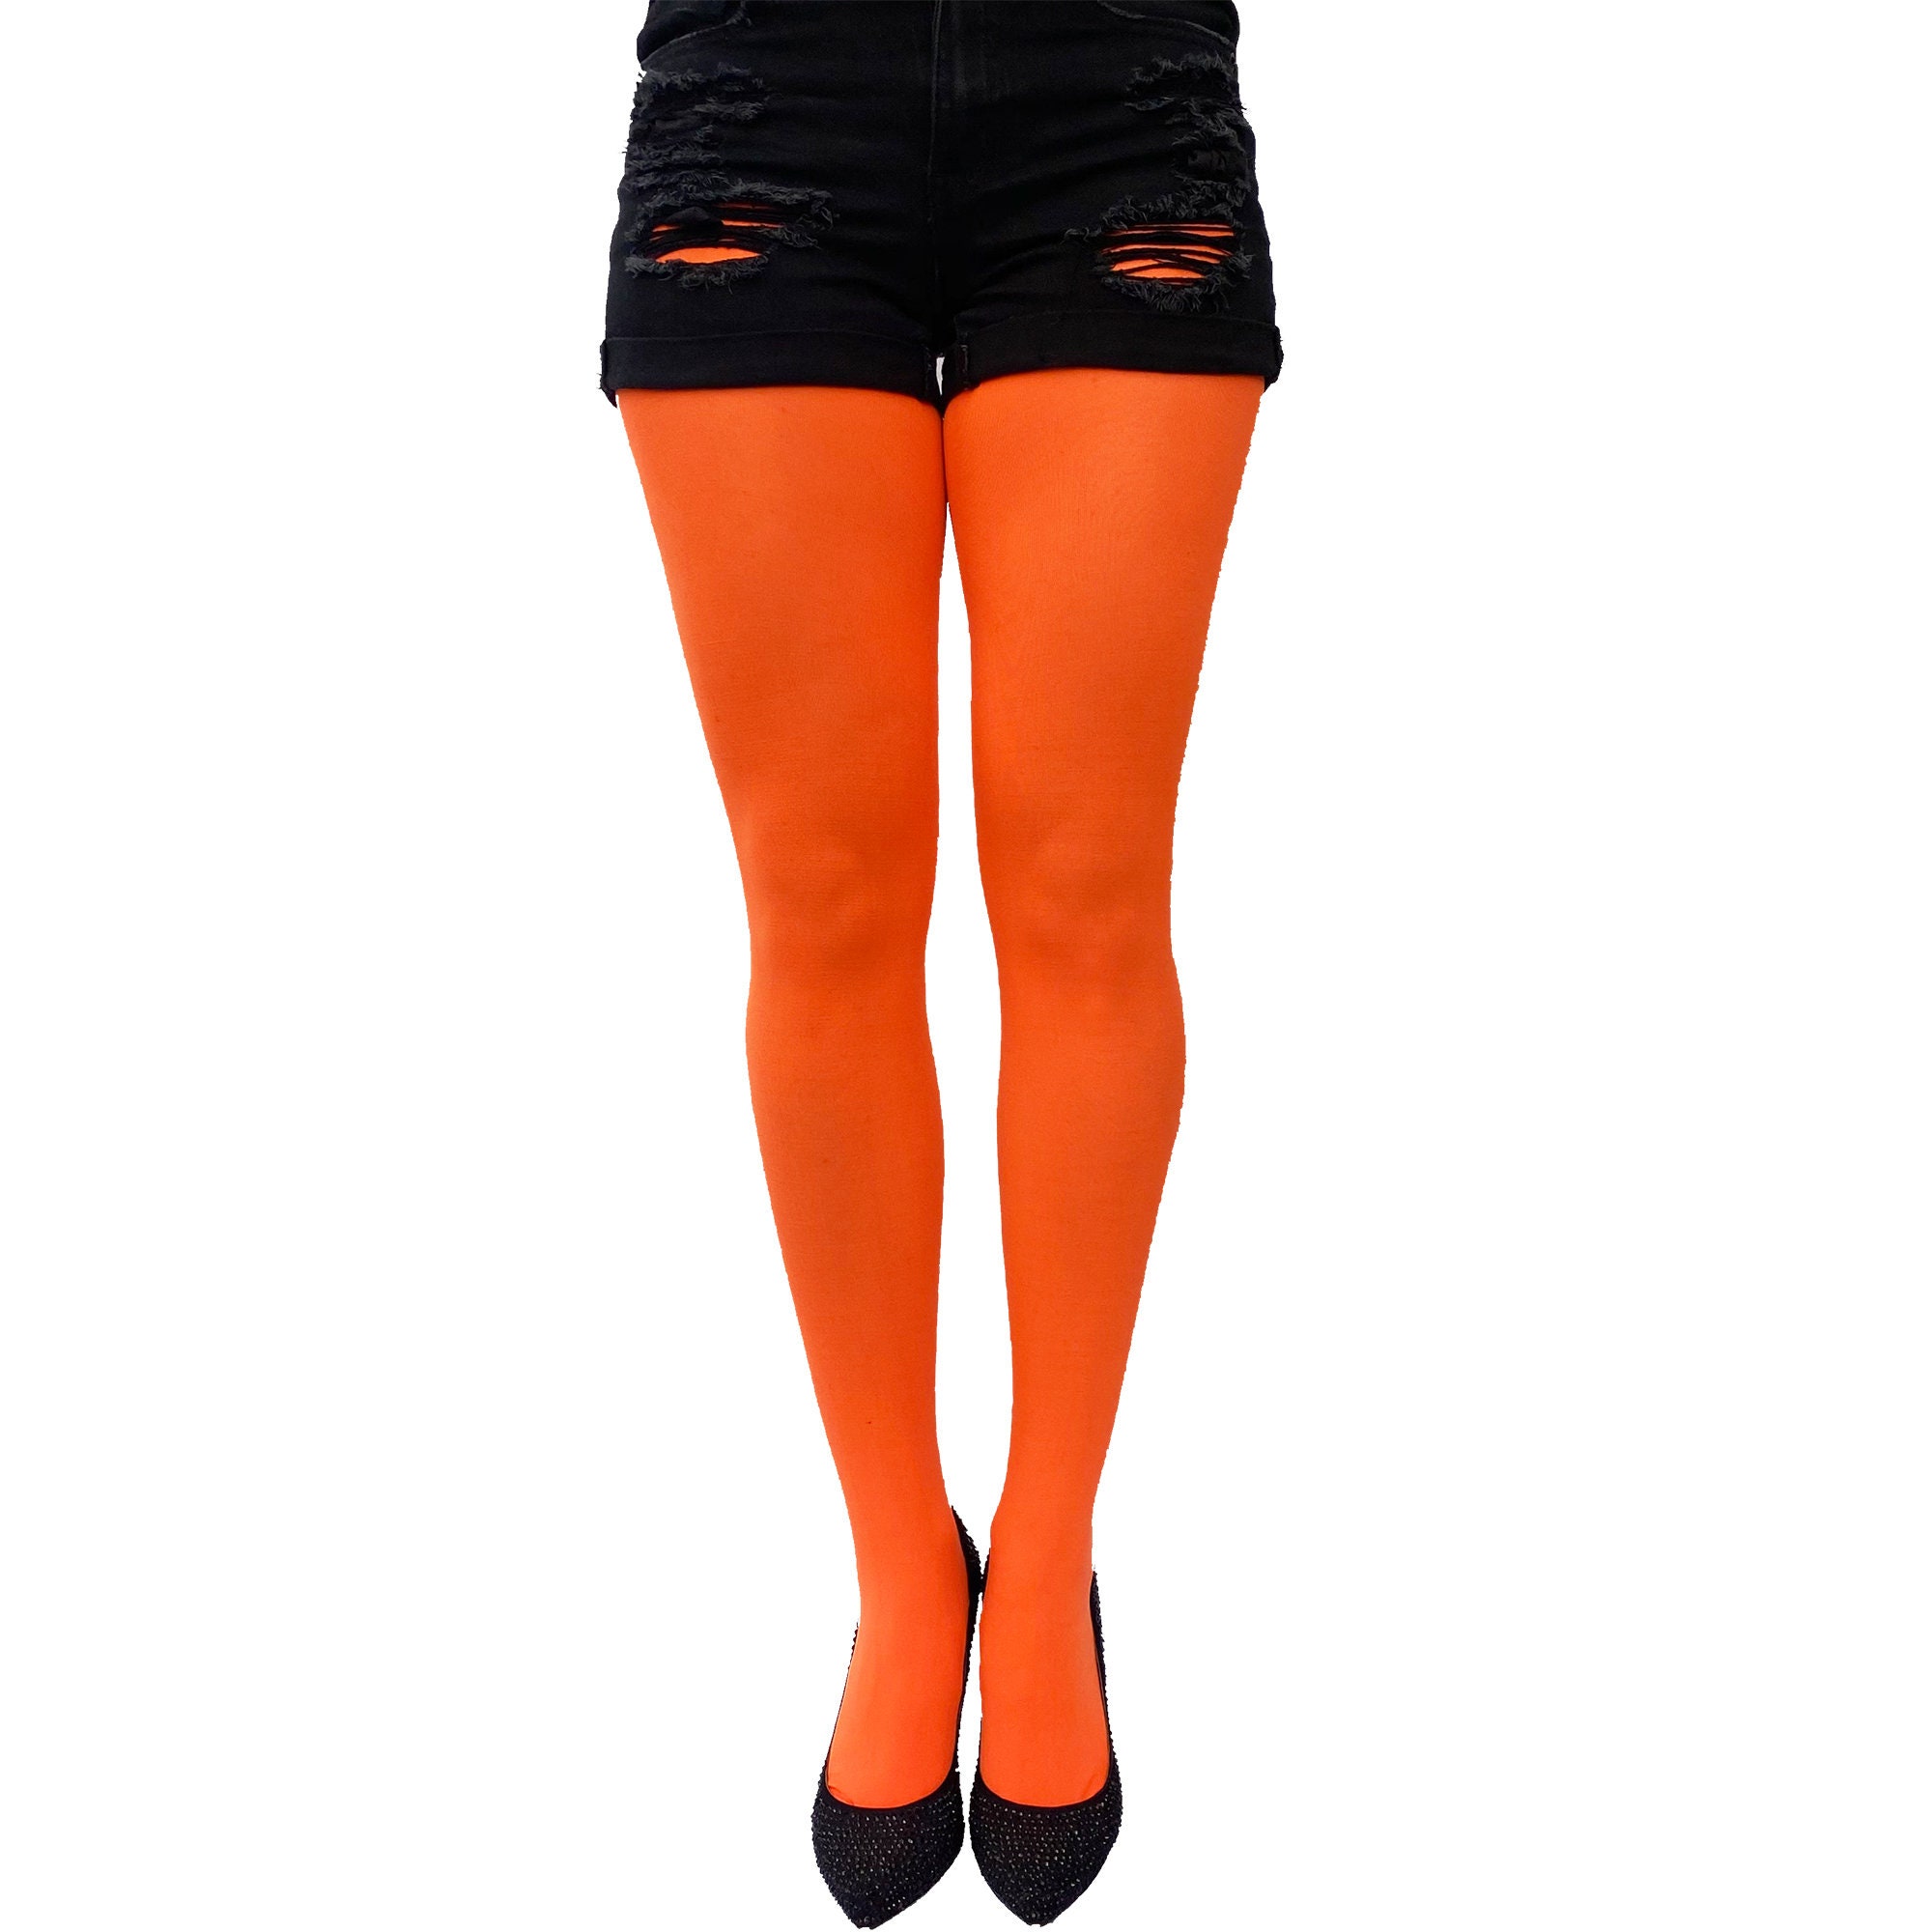 Orange Opaque Tights for Women Opaque Neon Full Footed - Etsy